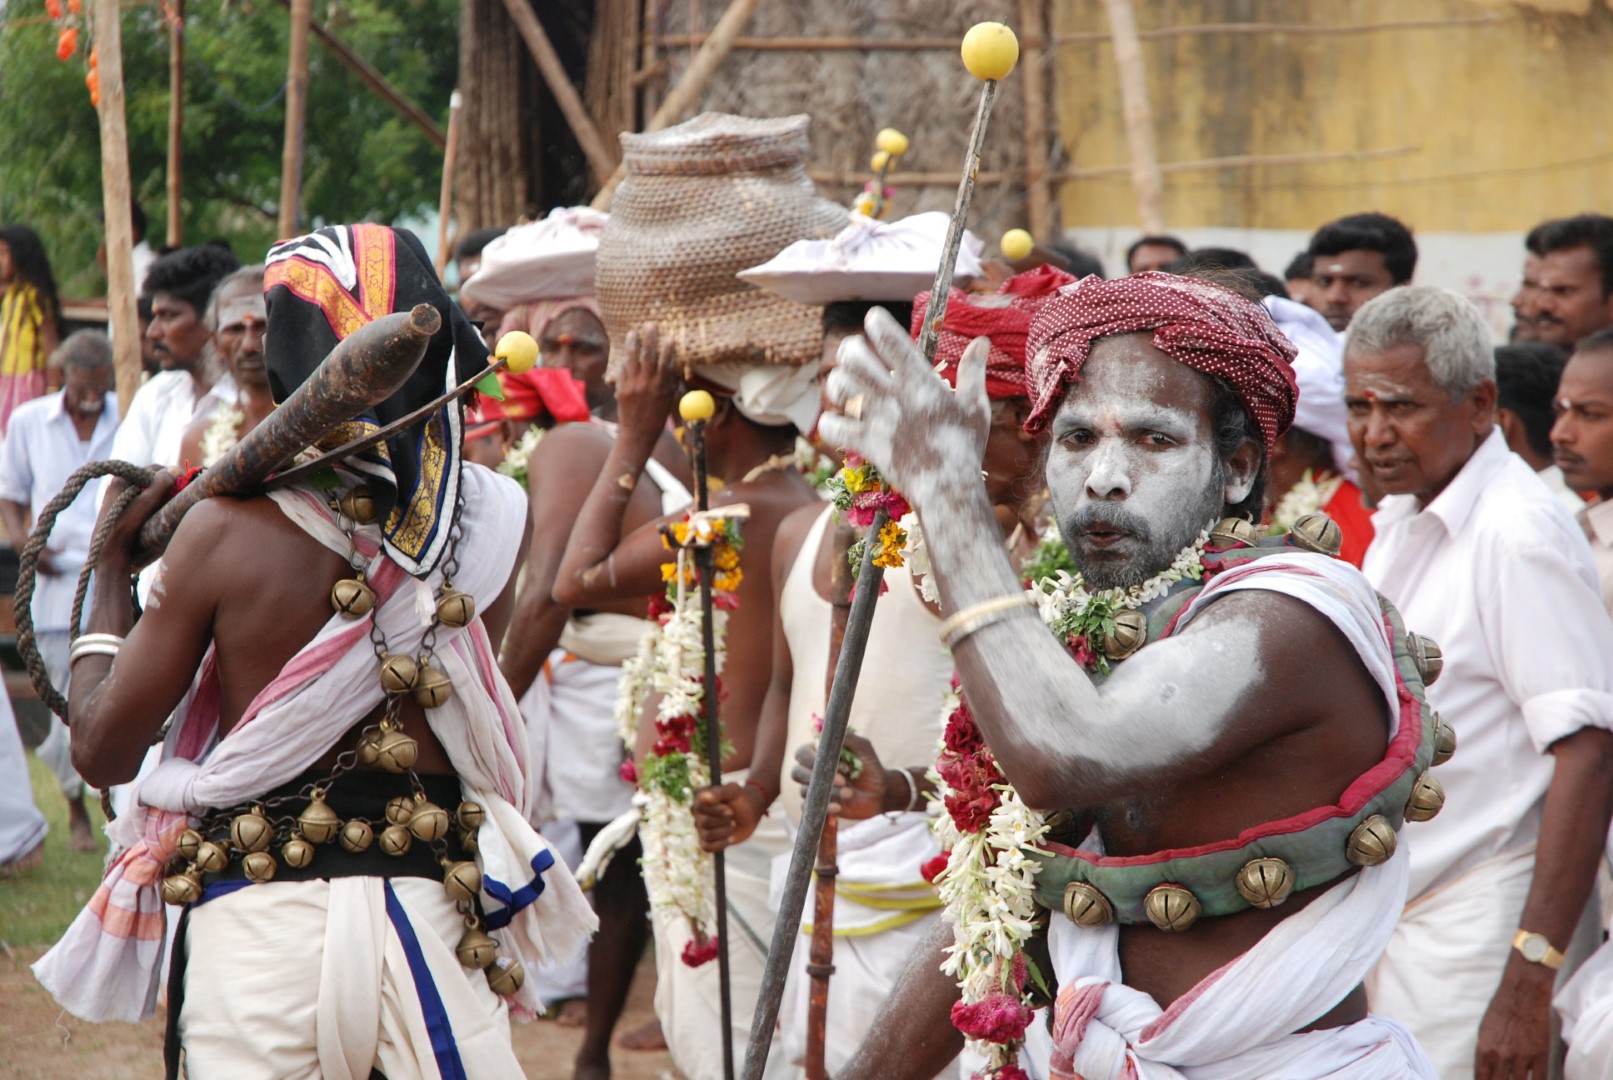 <span style="font-weight:normal;">Though each festival's manner of celebrating Ayyanis is unique, certain items are used in the majority of rituals, like the ones we see here: chains of bells, clubs, lances and sticks.</span>